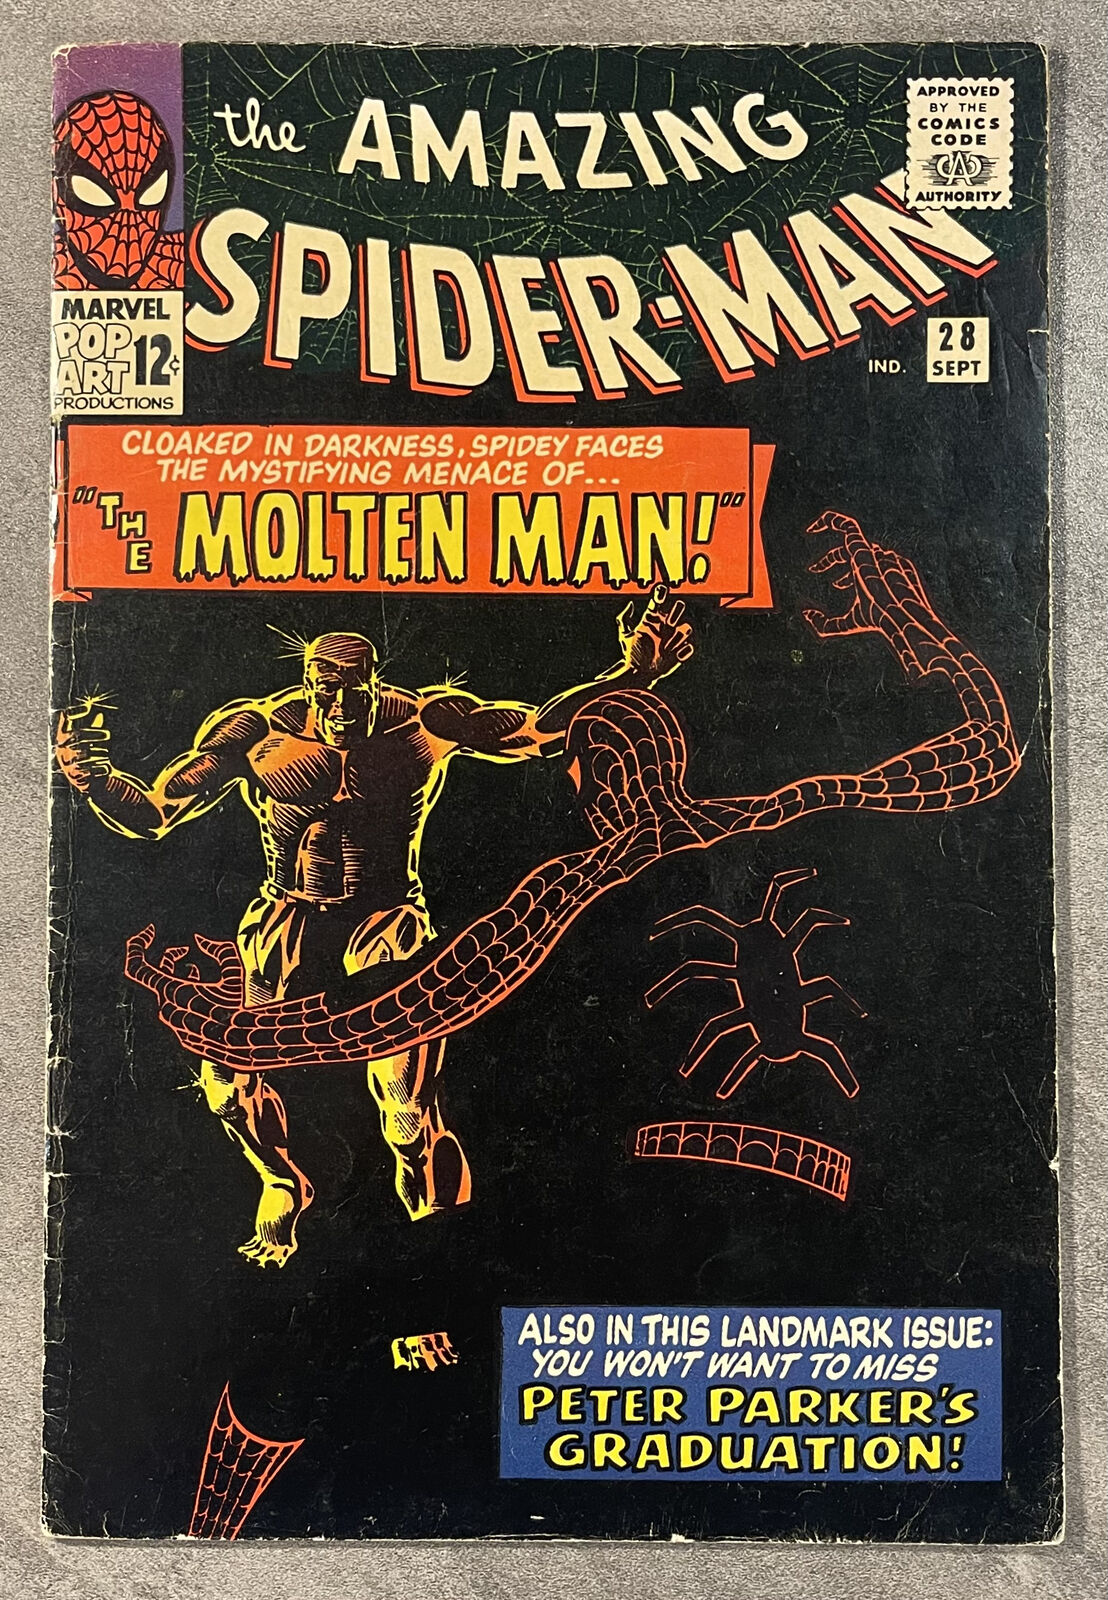 THE AMAZING SPIDER-MAN #28 SEPT 1965 - *KEY* FIRST MOLTEN MAN  **missing ads**